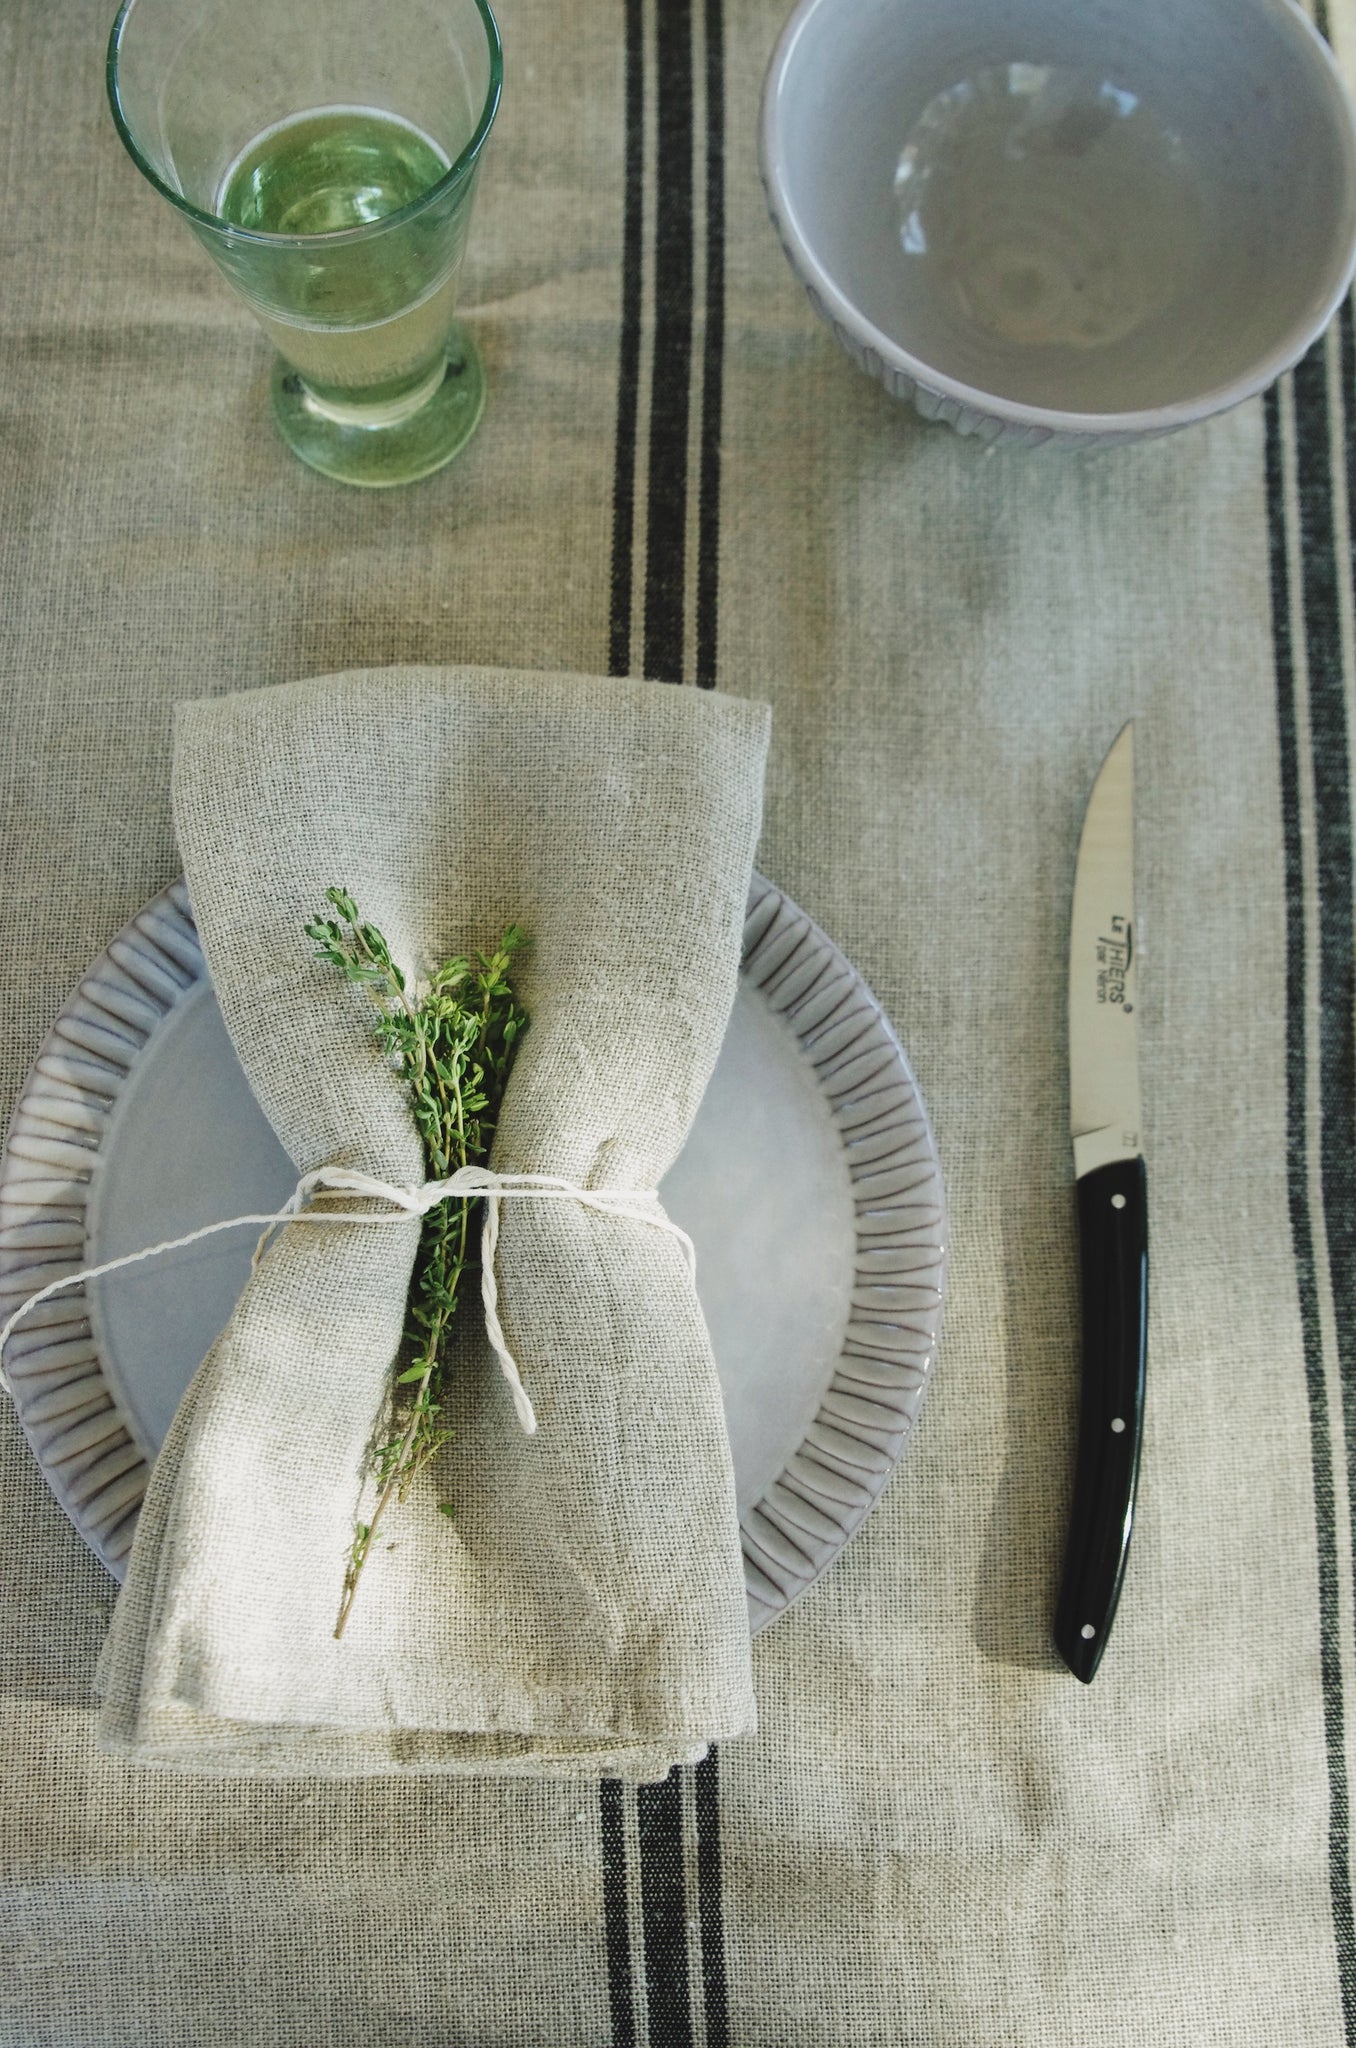 Tied linen napkin with herbs on plate with ridged edges next to small knife with black handle.